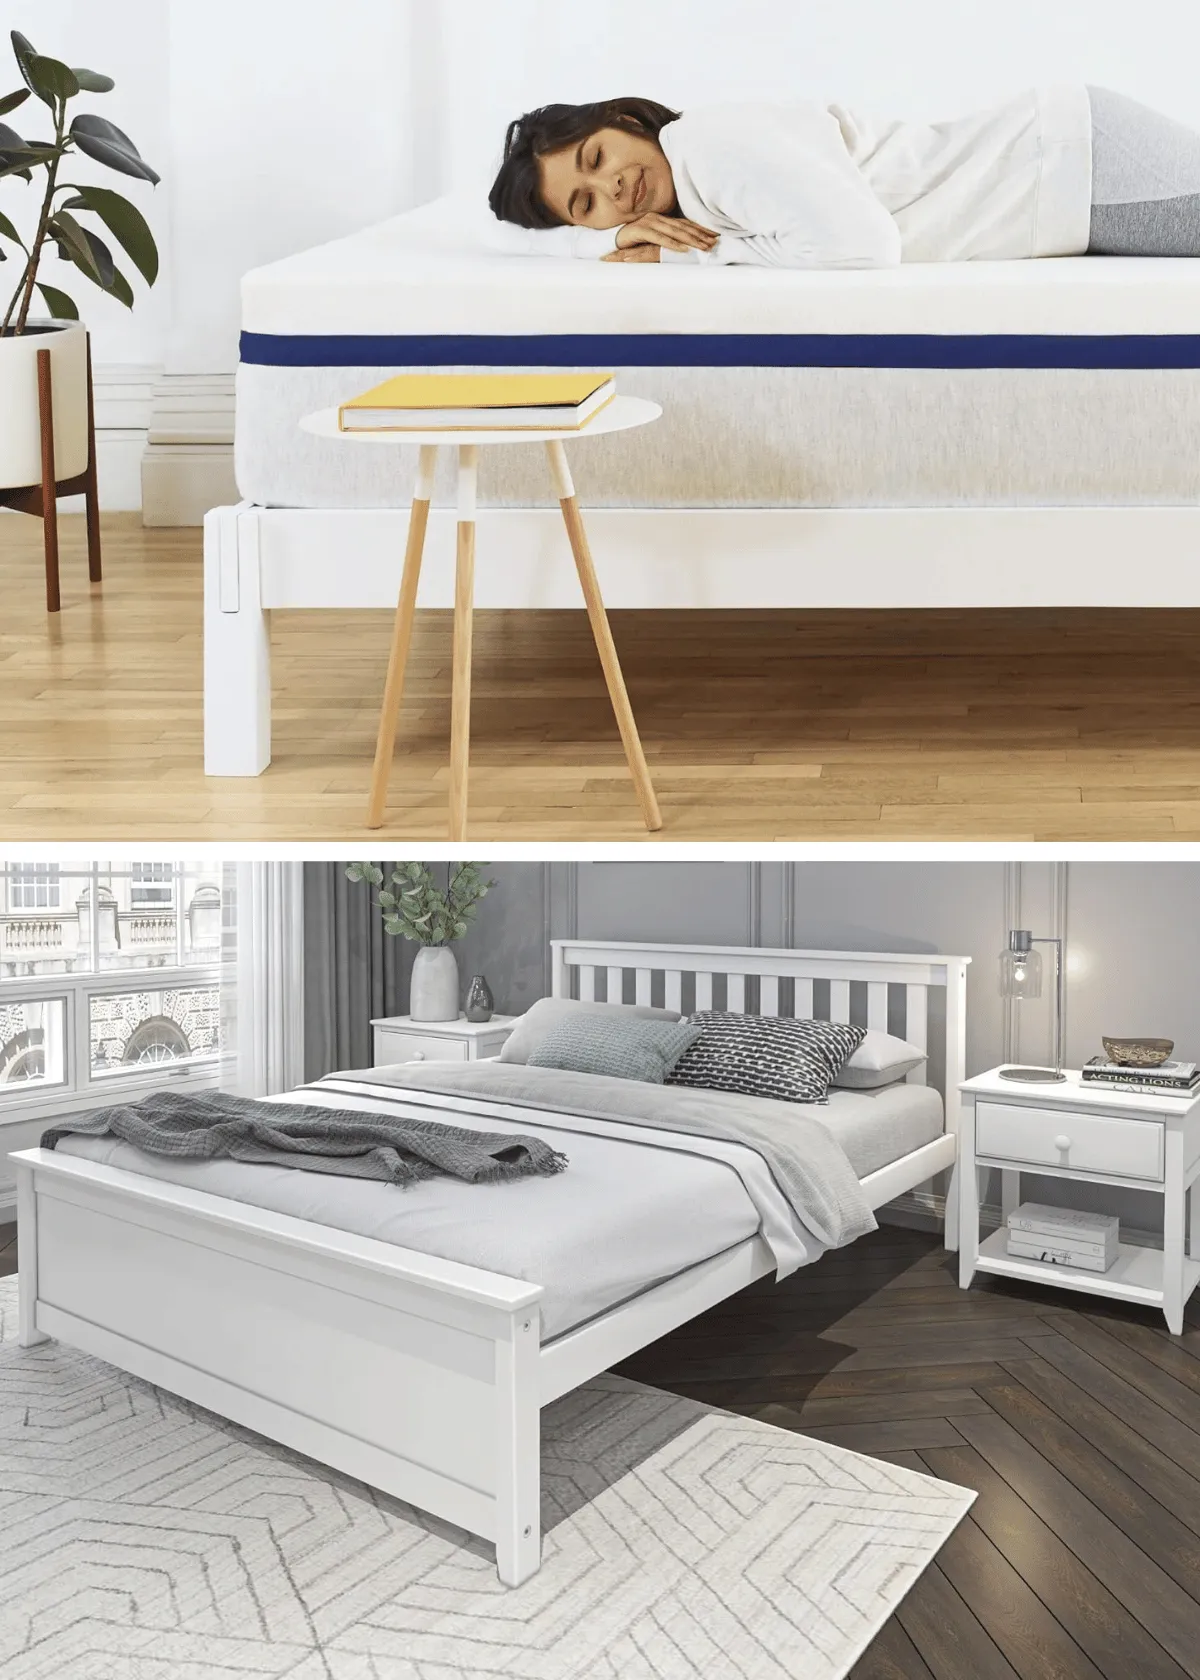 "Discover the 10 White Bed Frame Picks for Your Budget & Style"